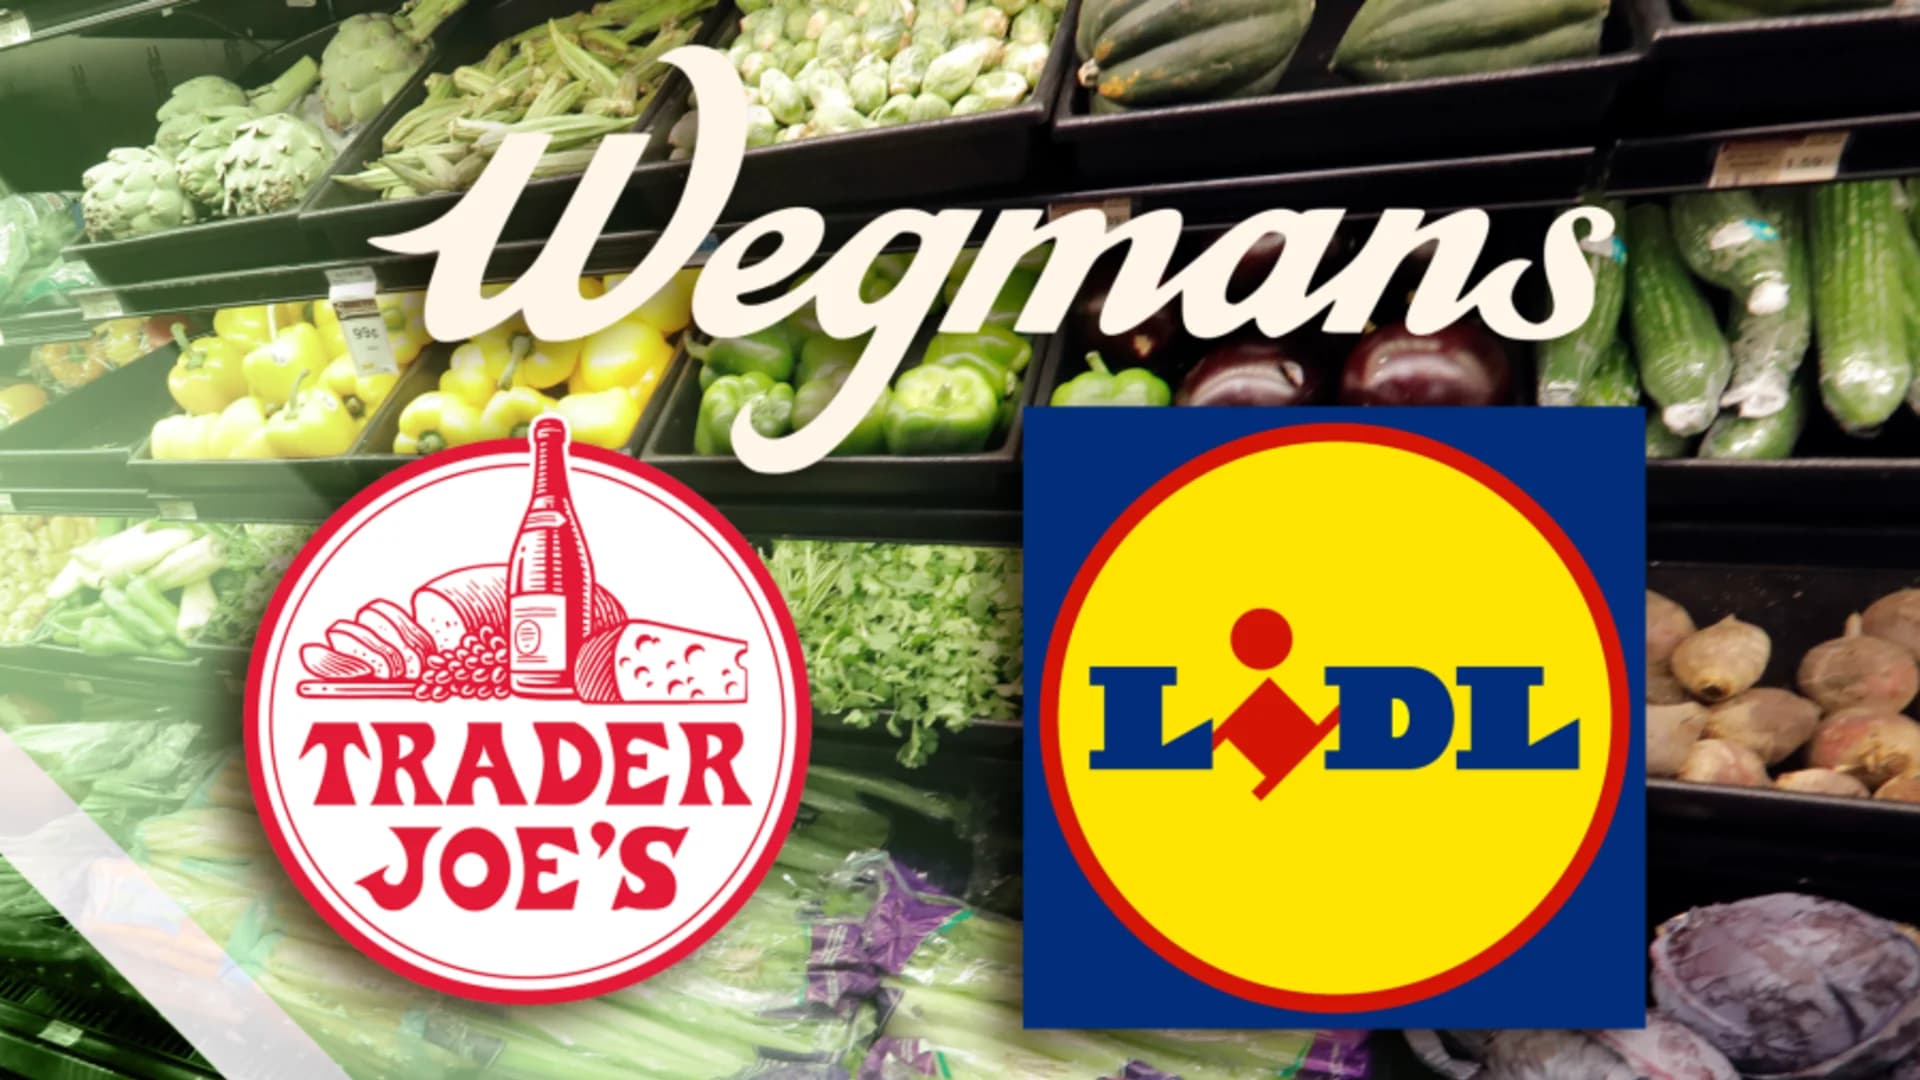 Wegmans, Trader Joe’s and more: The 2020 list of the 10 Best Supermarkets in America